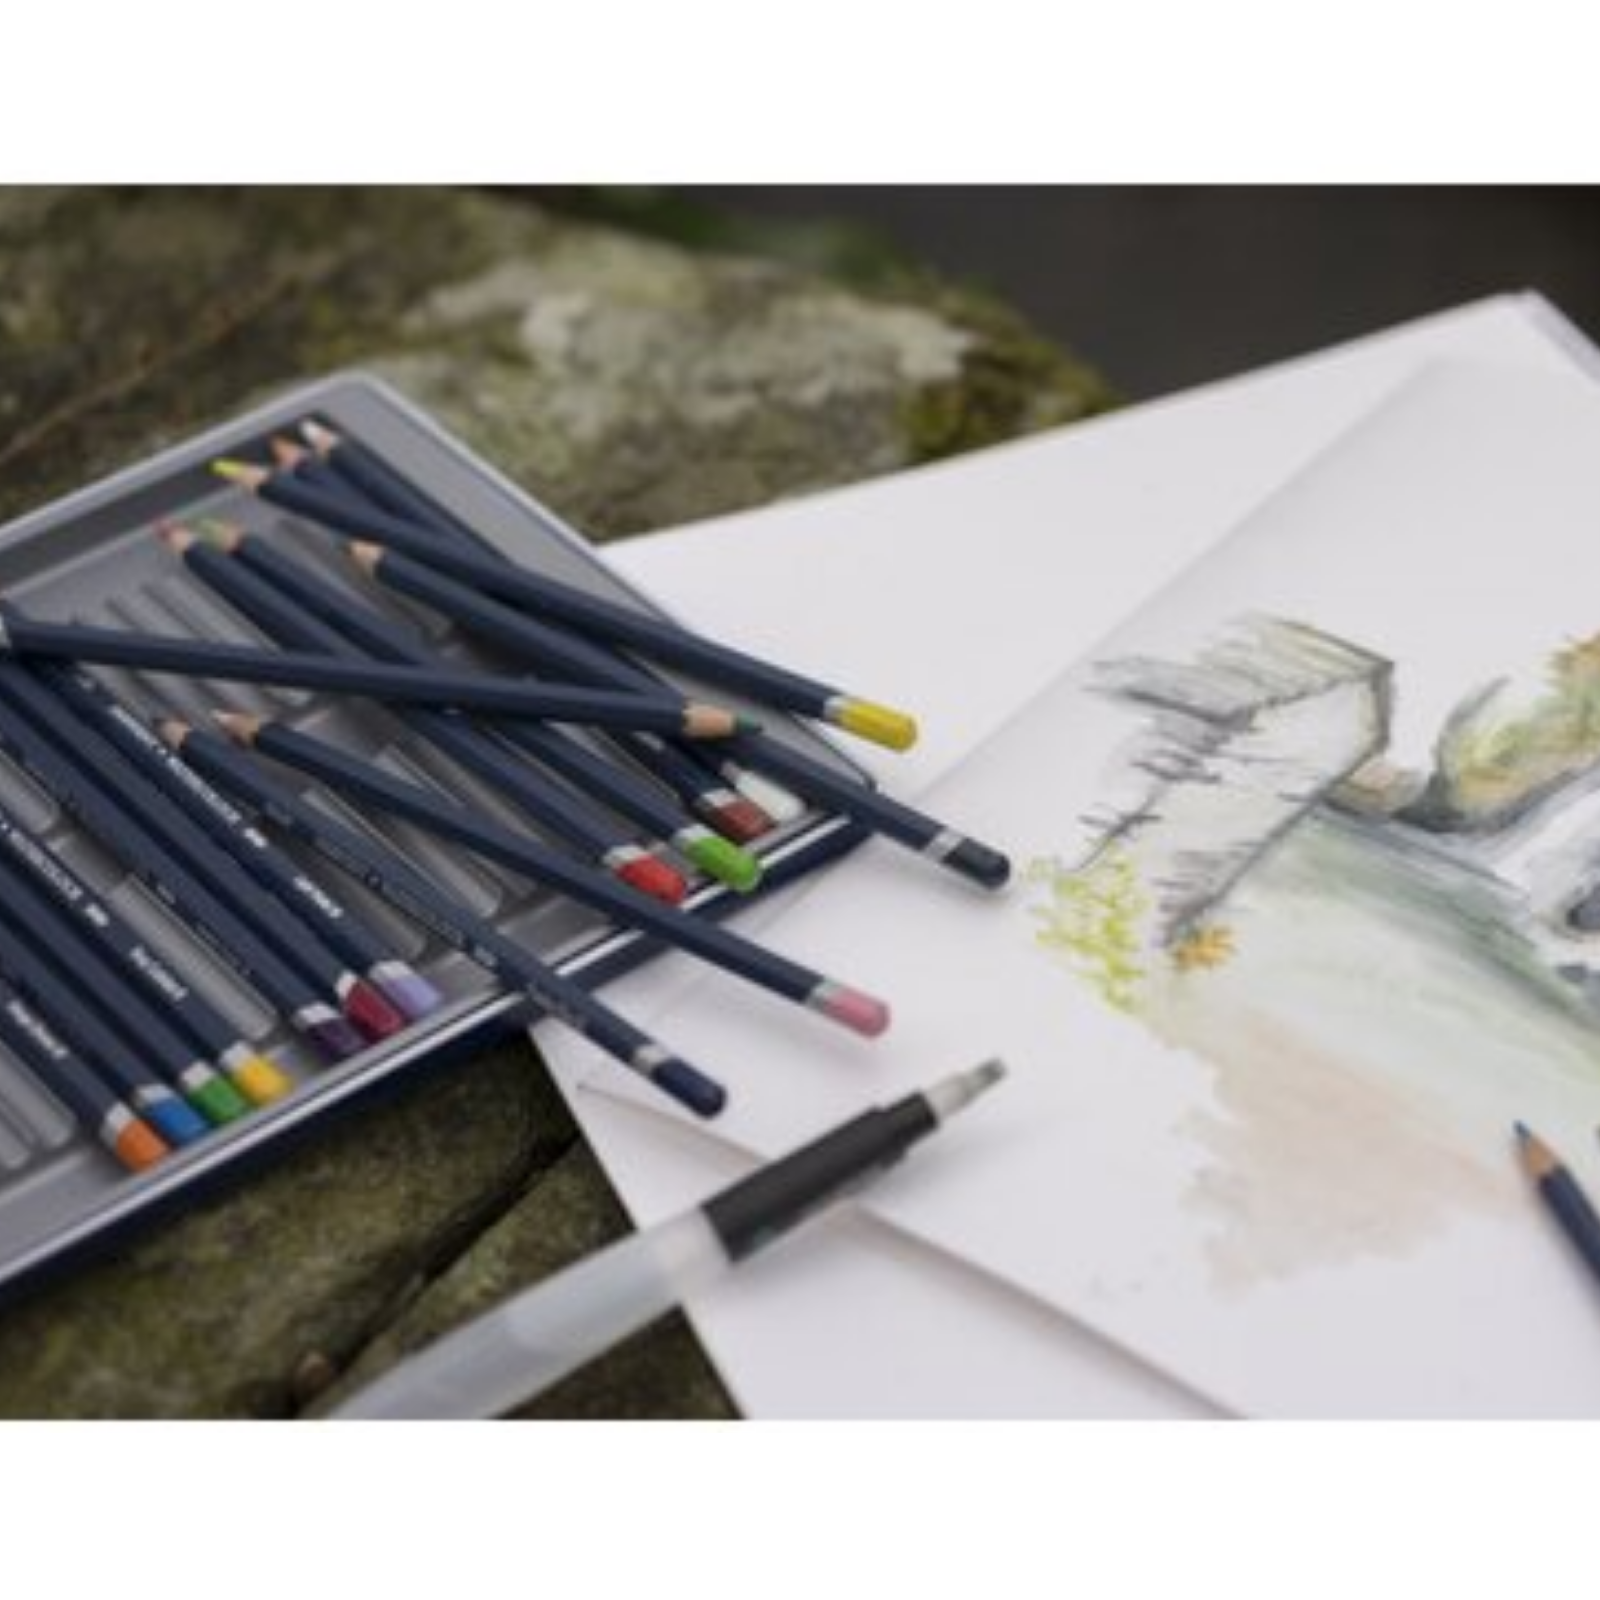 Derwent 24 Watercolour Pencils, Colouring, Blending, Layering, Drawing - Soft textured pencils can be used wet or dry